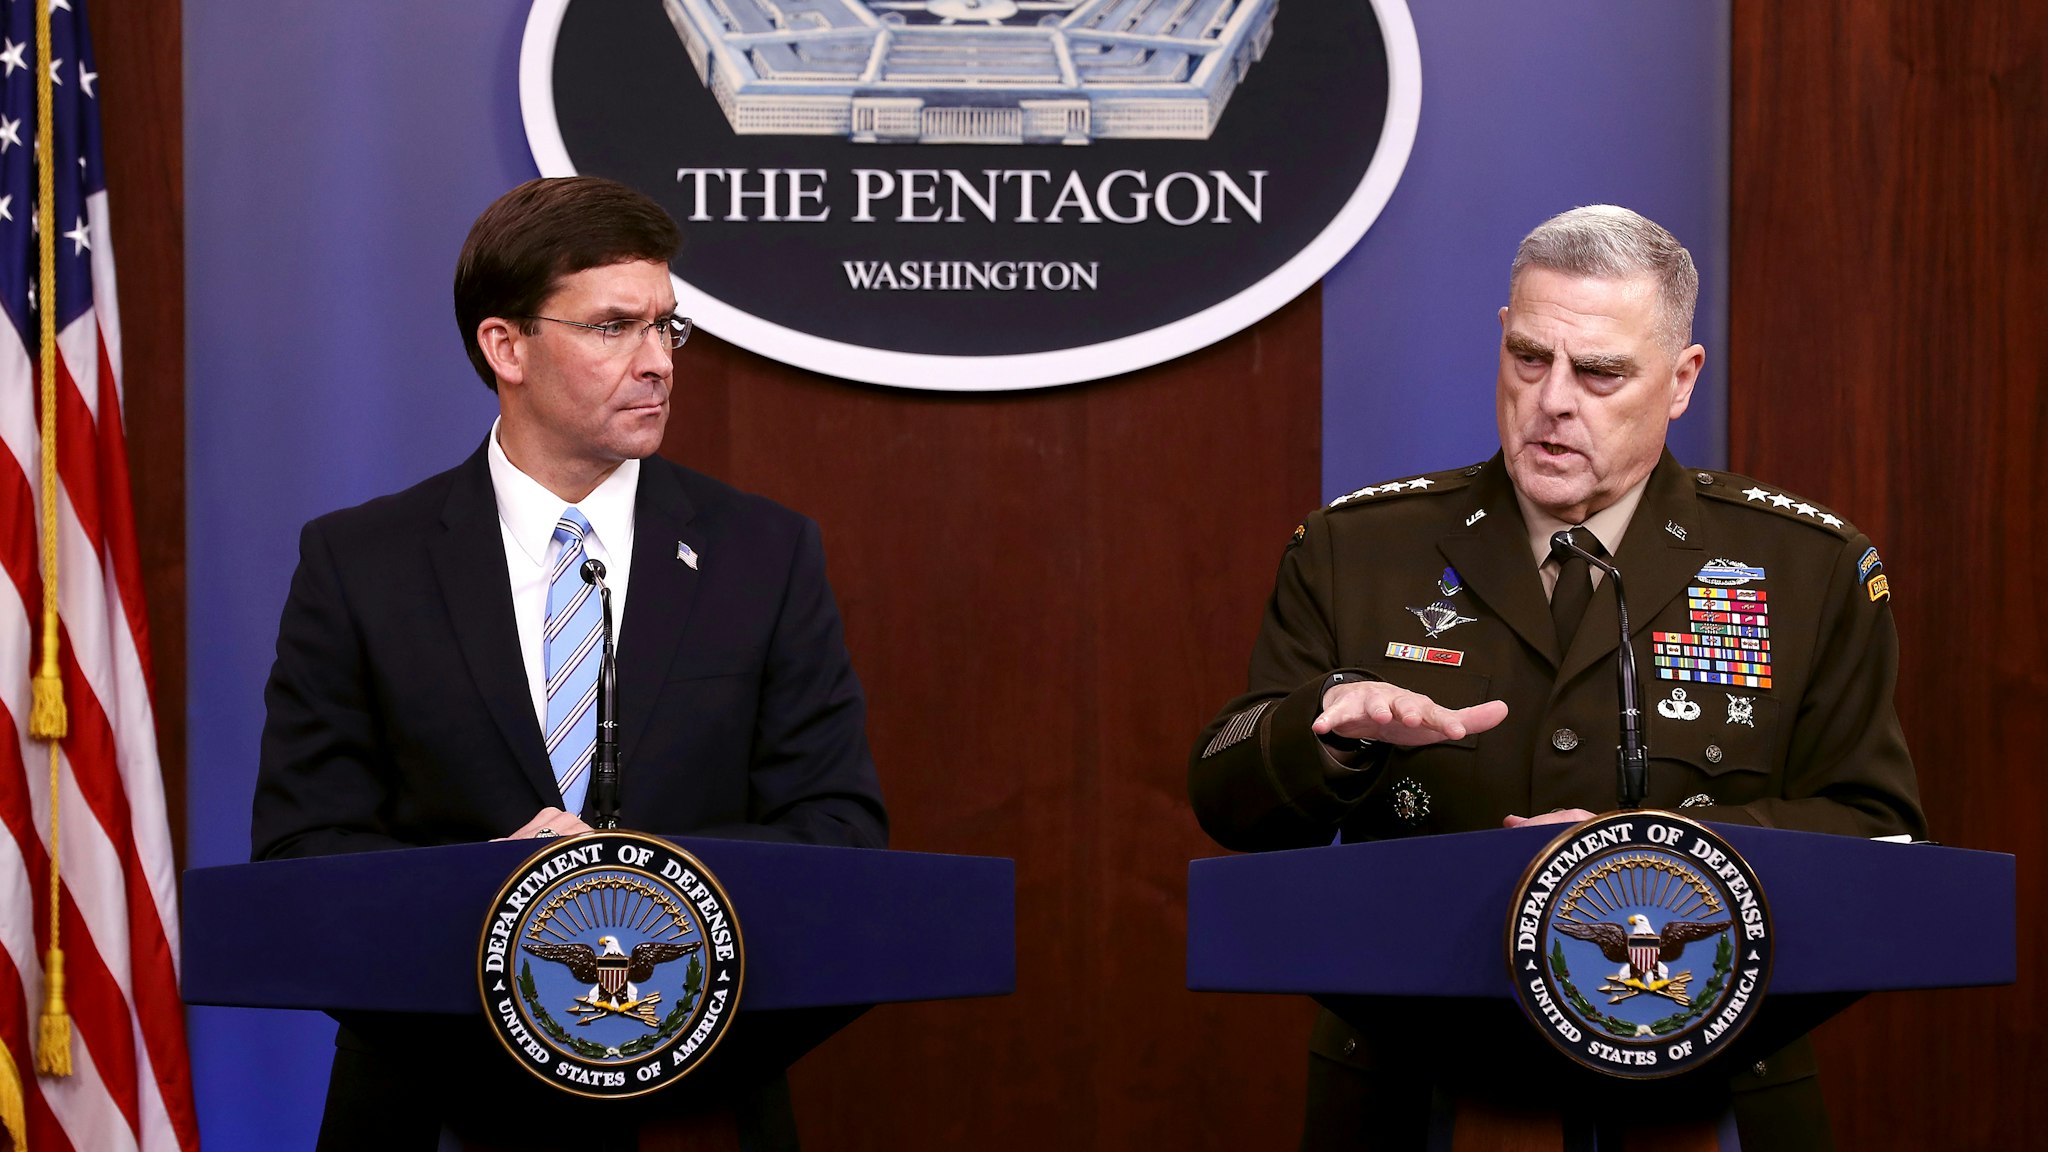 ARLINGTON, VIRGINIA - OCTOBER 28: U.S. Defense Secretary Mark Esper (L) and Chairman of the Joint Chiefs of Staff Gen. Mark Milley hold a news conference at the Pentagon the day after it was announced that Abu Bakr al-Baghdadi was killed in a U.S. raid in Syria October 28, 2019 in Arlington, Virginia. The leader and self-proclaimed caliph of the Islamic State, al-Baghdadi reportedly blew himself up with explosives when cornered by a U.S. Special Operations team at his compound in Syria.